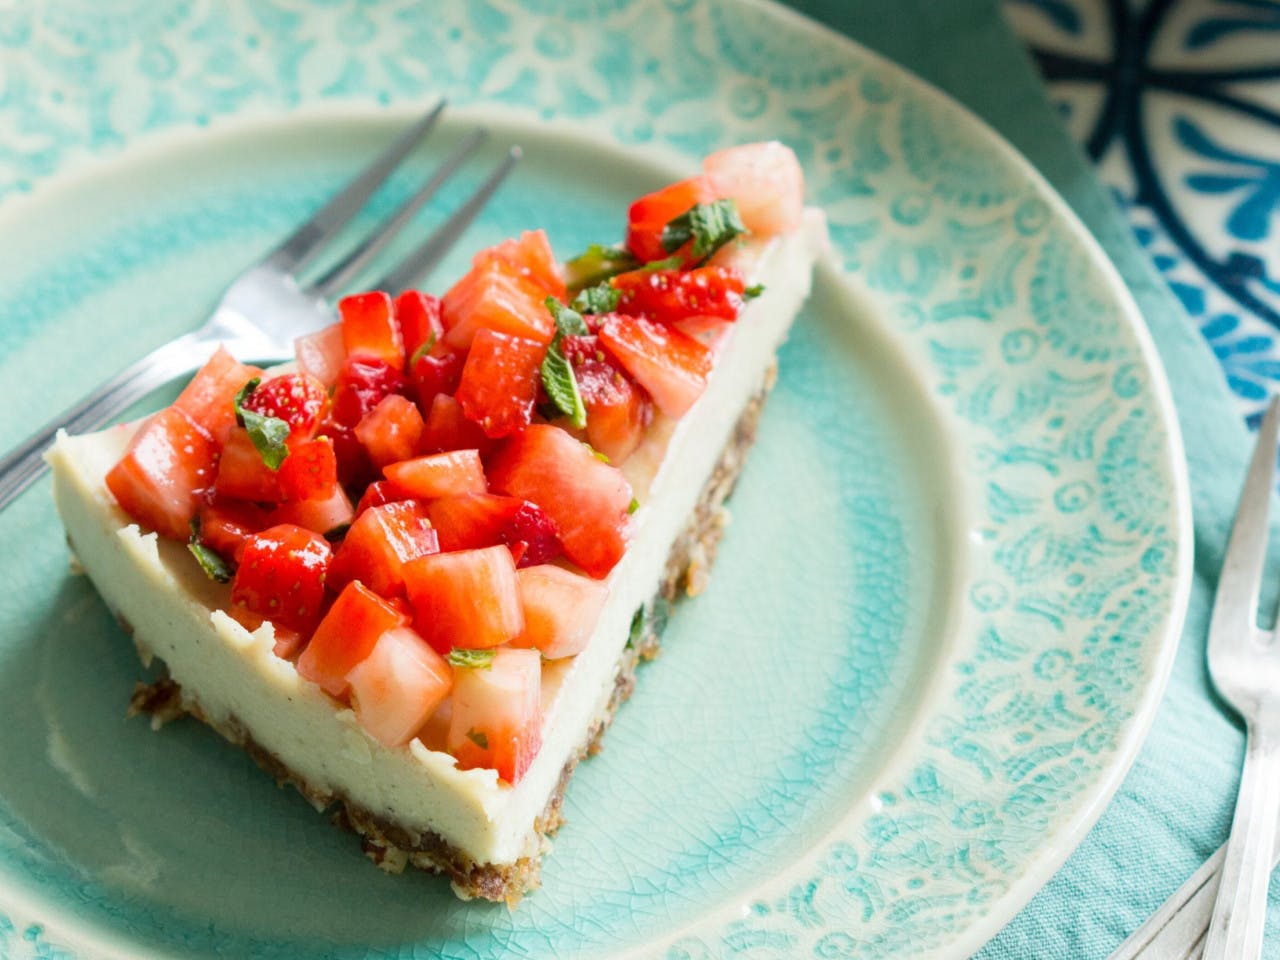 Lemon cheesecake with strawberries and mint